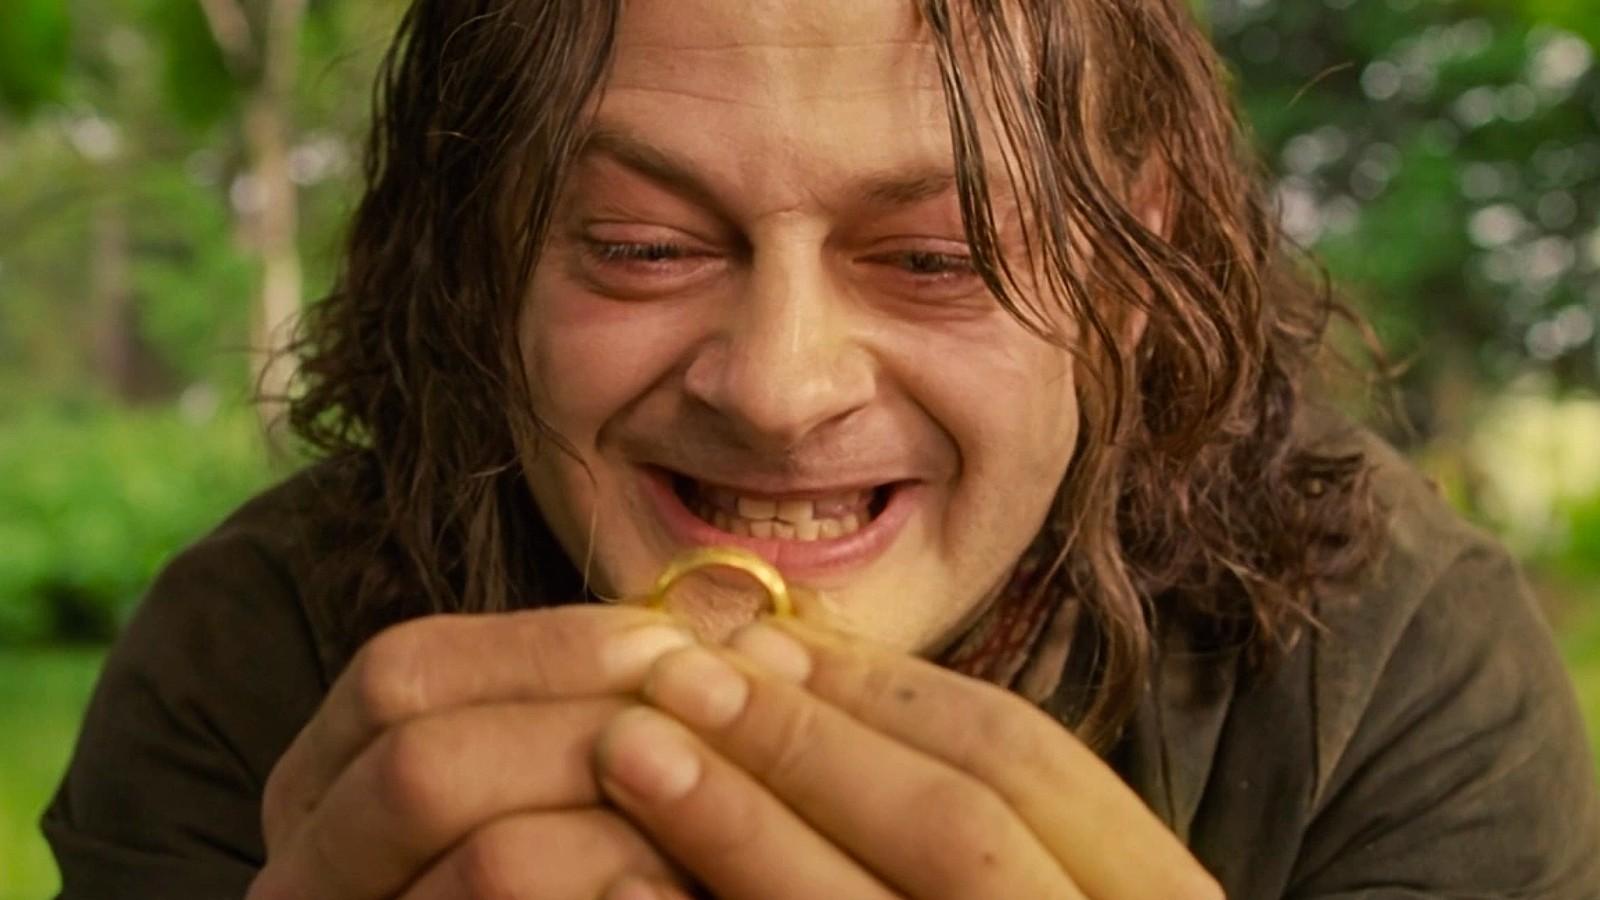 Gollum Actor Andy Serkis Ready to Return for New Line's 'Lord of the Rings'  Movie - Inside the Magic